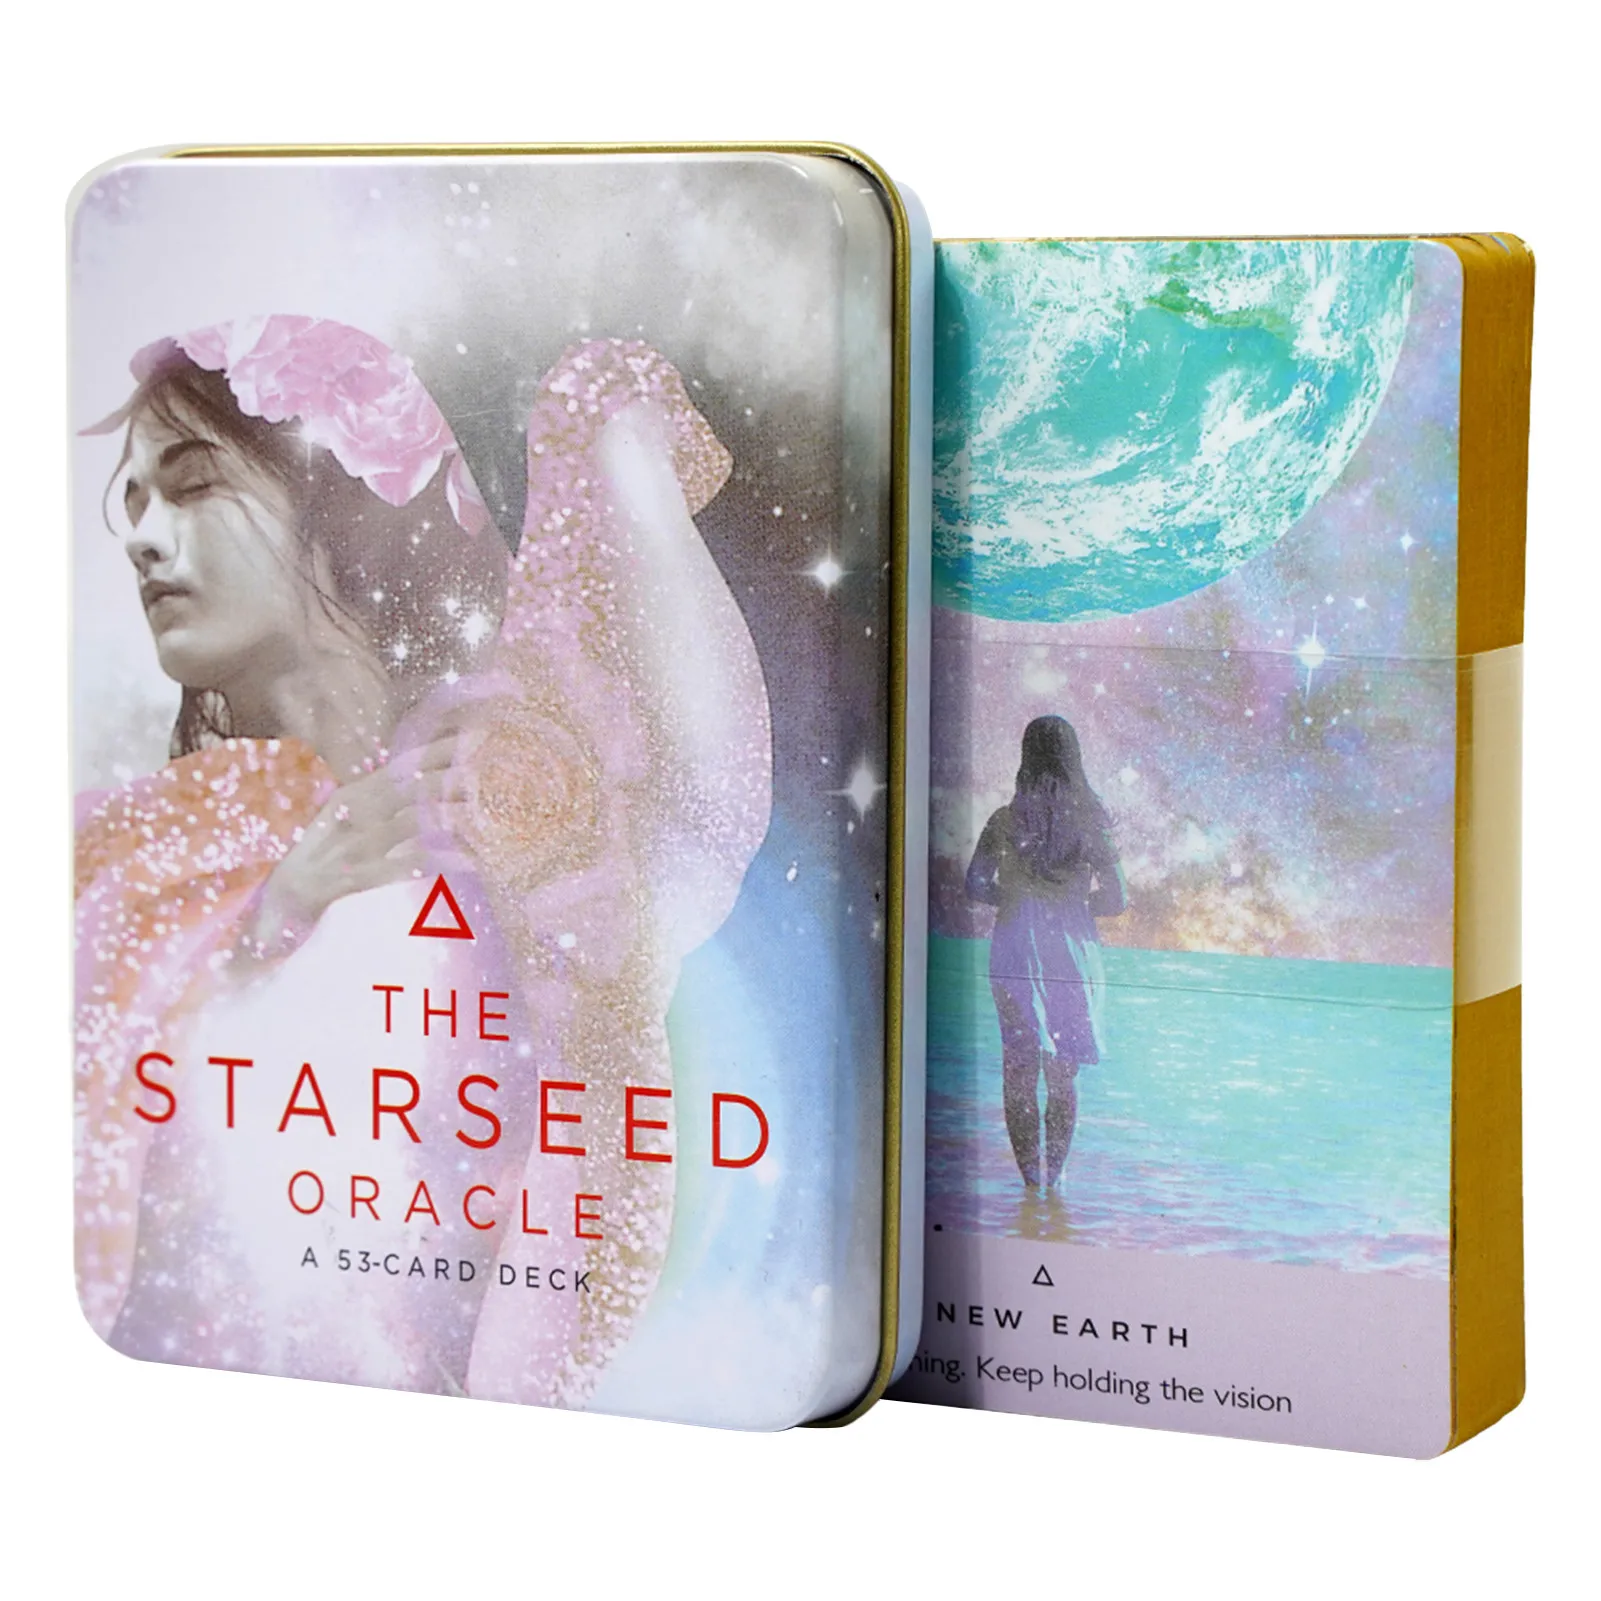 

The Starseed Oracle Tarot Deck In A Tin Box Gilded Edge For Beginners Fortune Telling Game Card 53 Card Deck Table Board Game